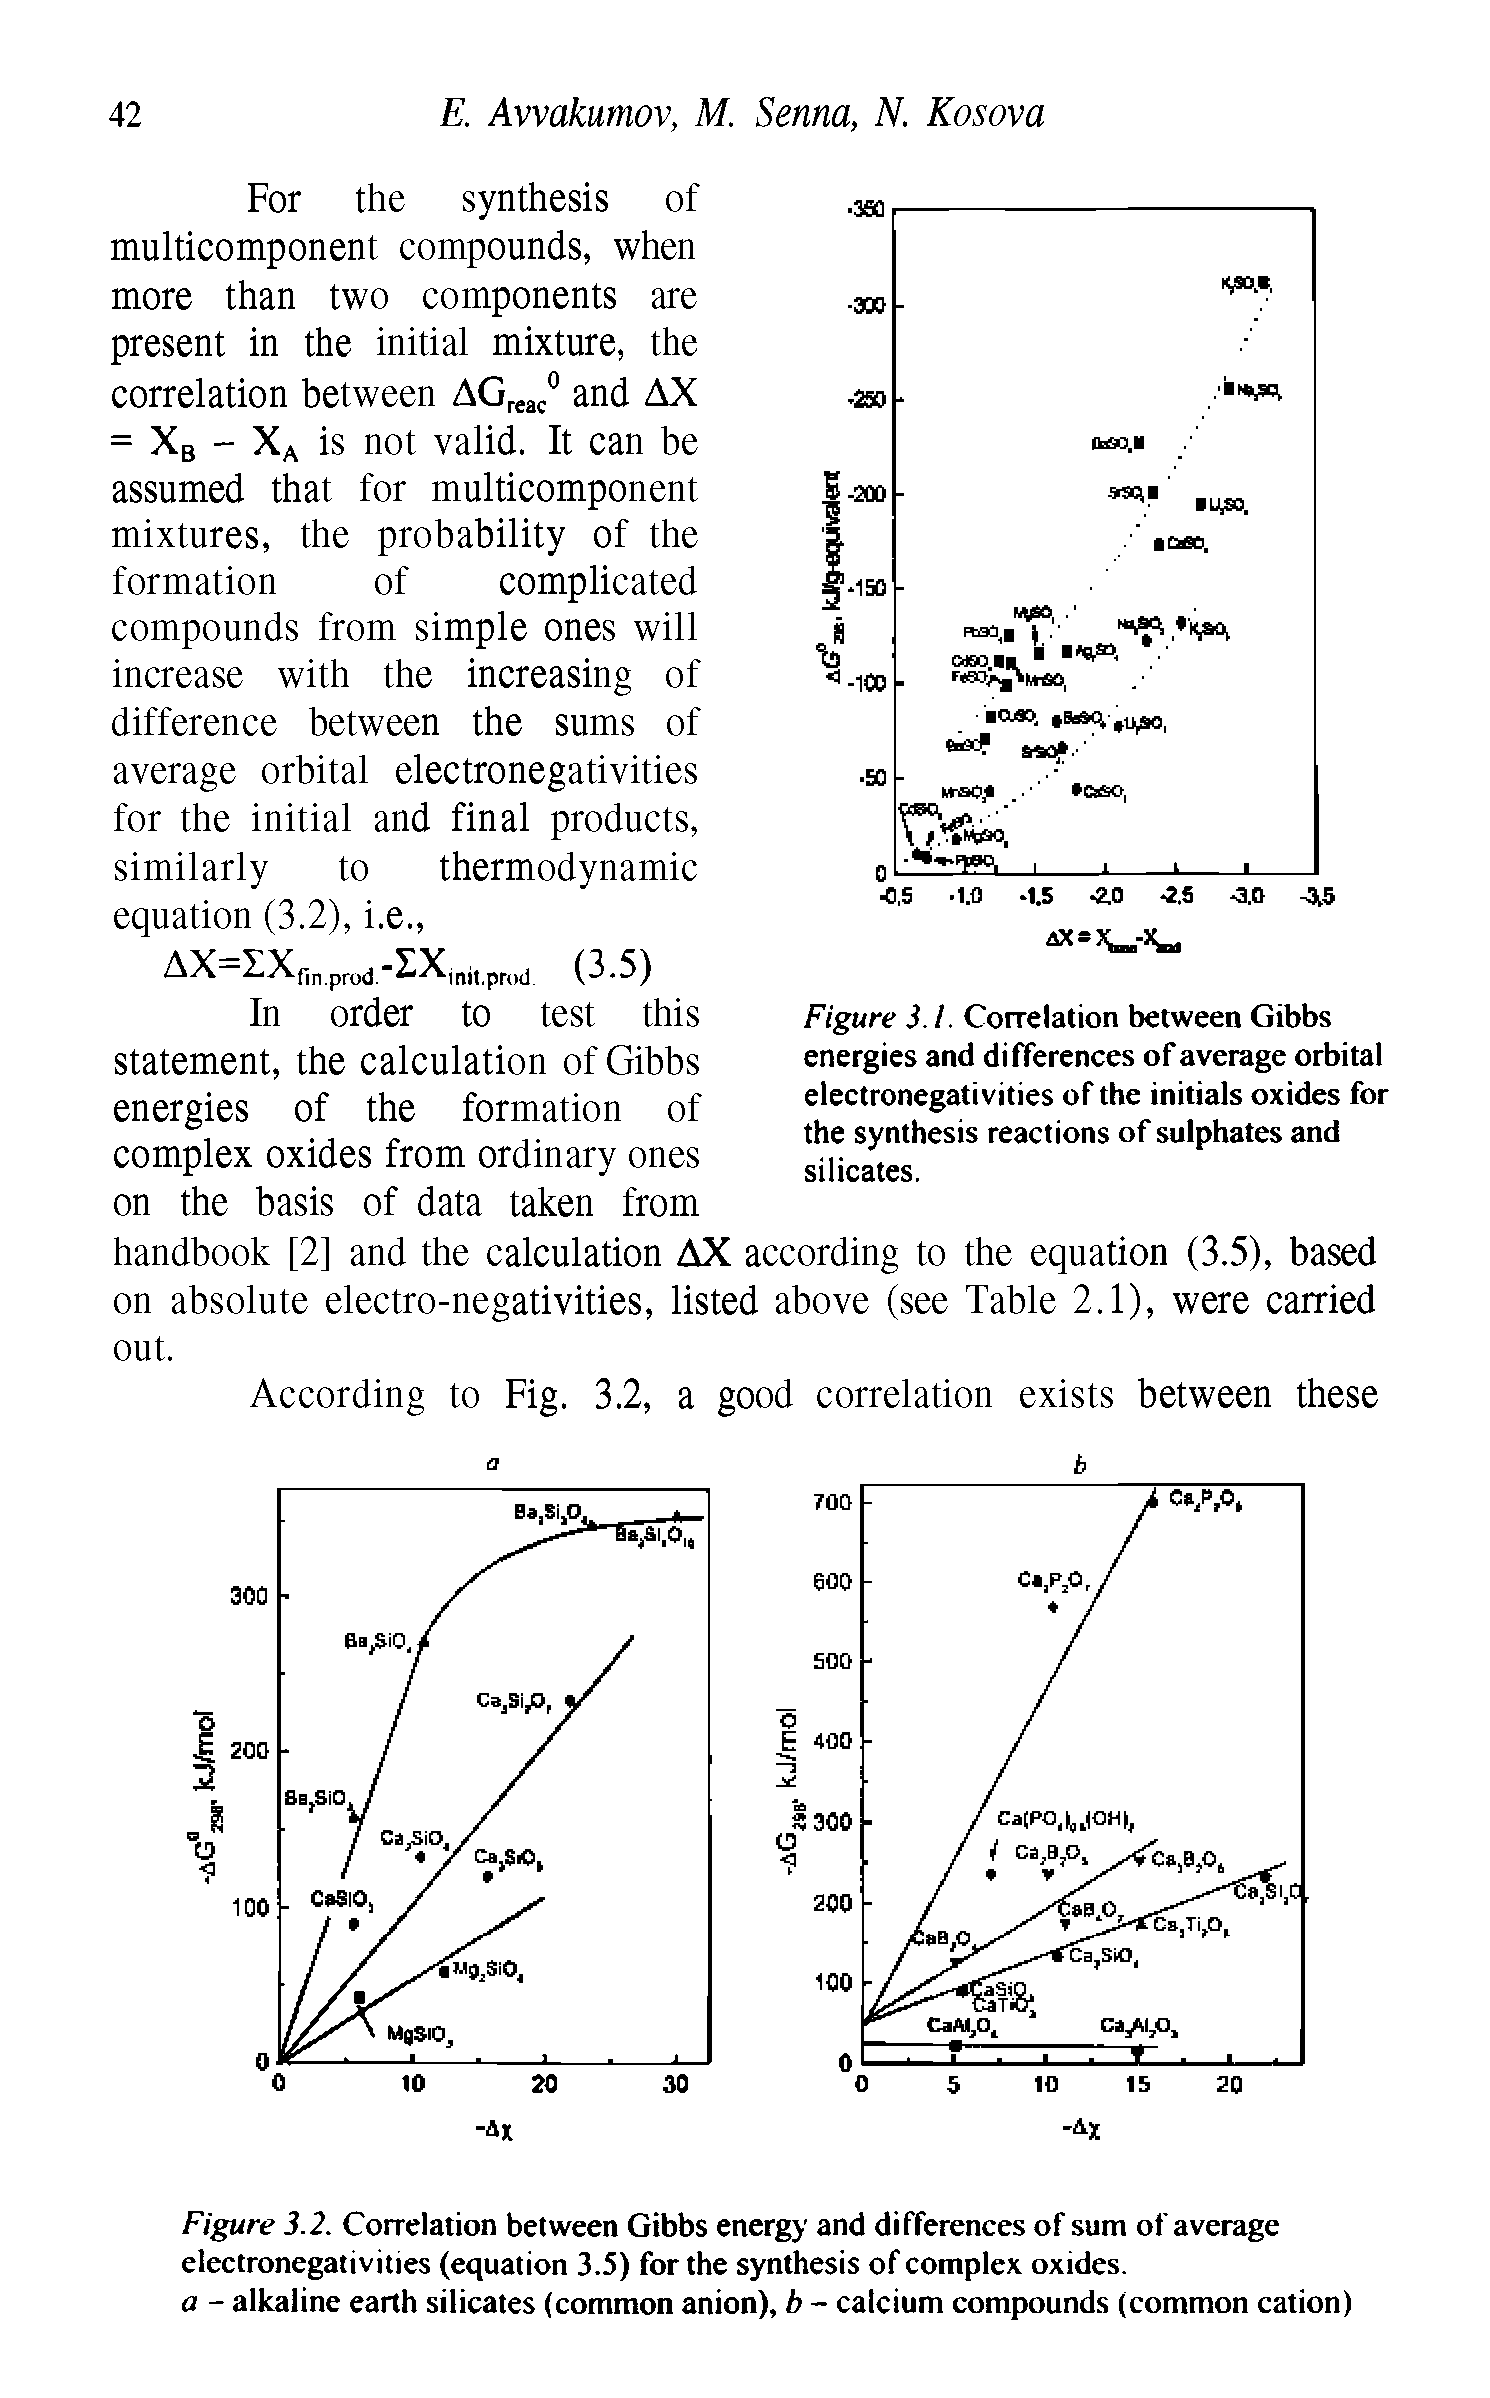 Figure 3.1. Correlation between Gibbs energies and differences of average orbital electronegativities of tbe initials oxides for the synthesis reactions of sulphates and silicates.